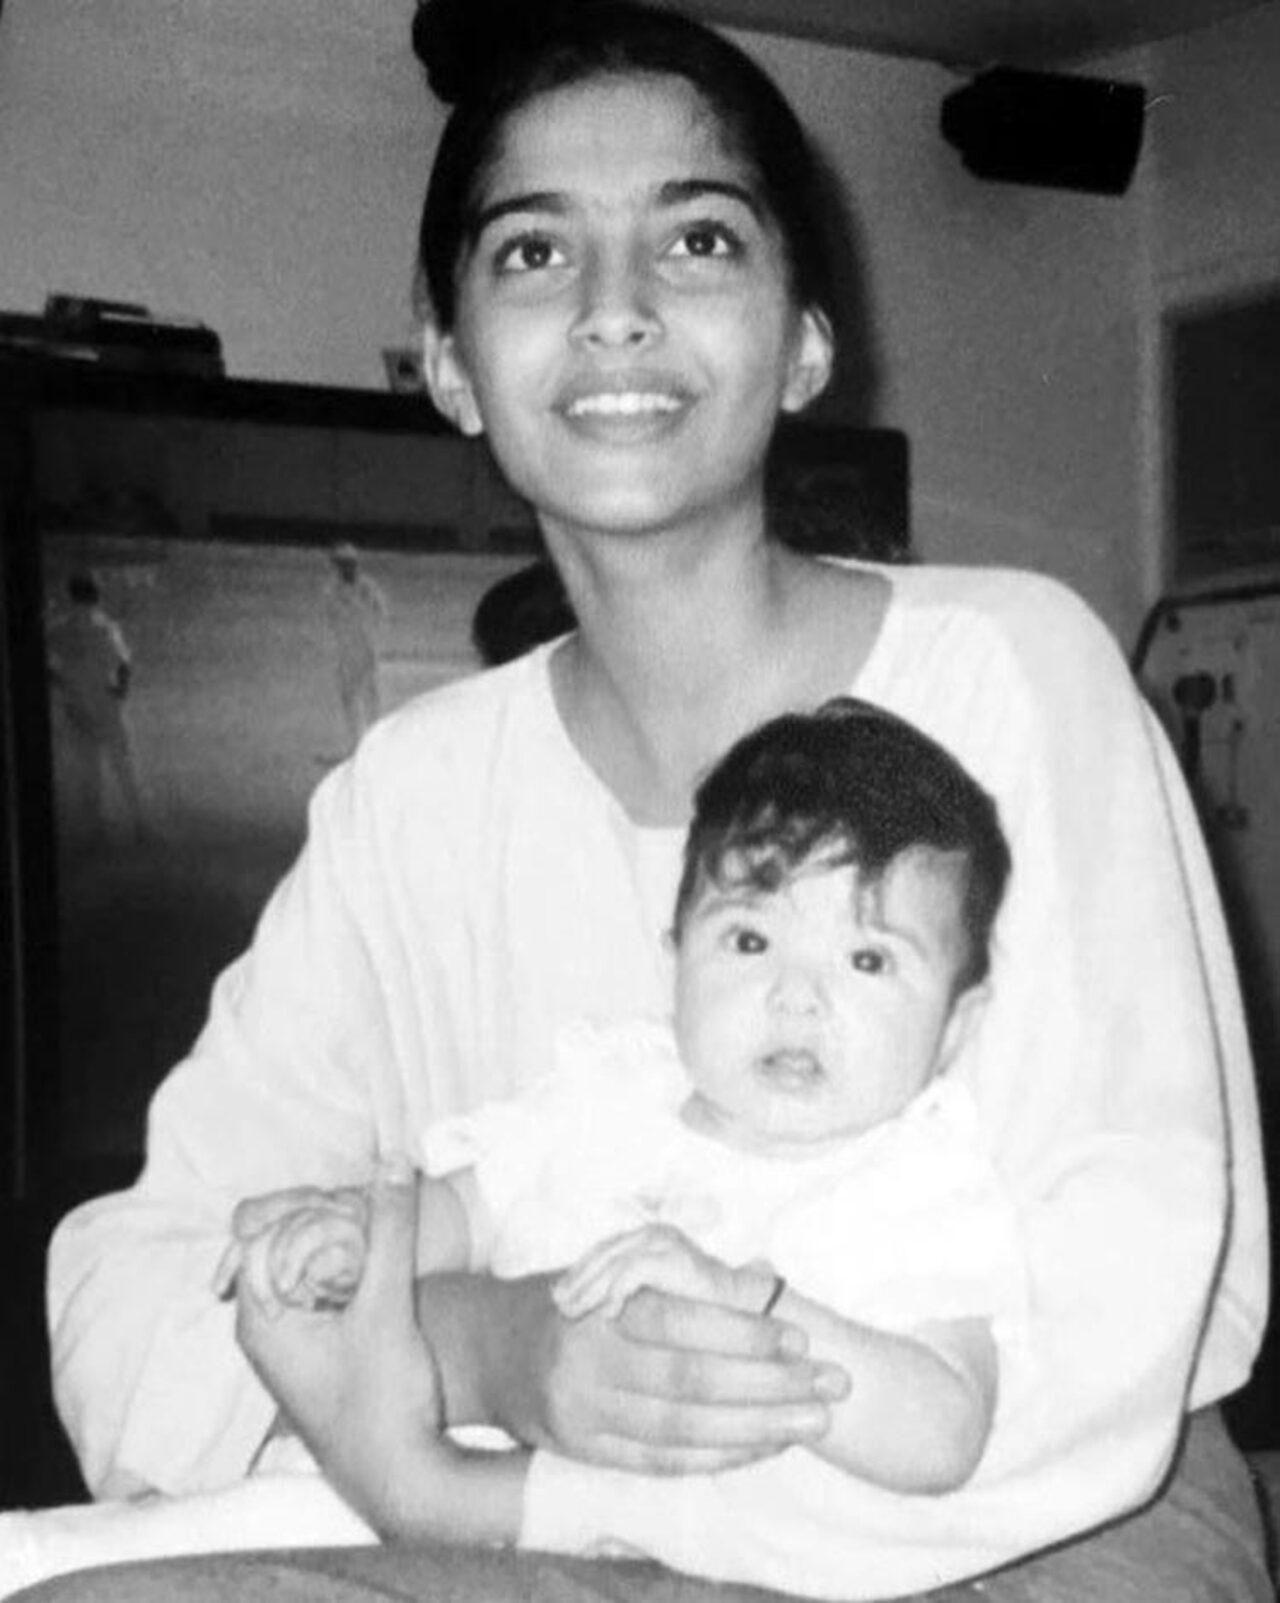 On cousin Shanaya Kapoor's 18th birthday, Sonam shared an adorable photo of the actress as a baby playing in her lap. “Happy 18th Shanaya! Hope you have a fabulous day and a more spectacular year ahead,